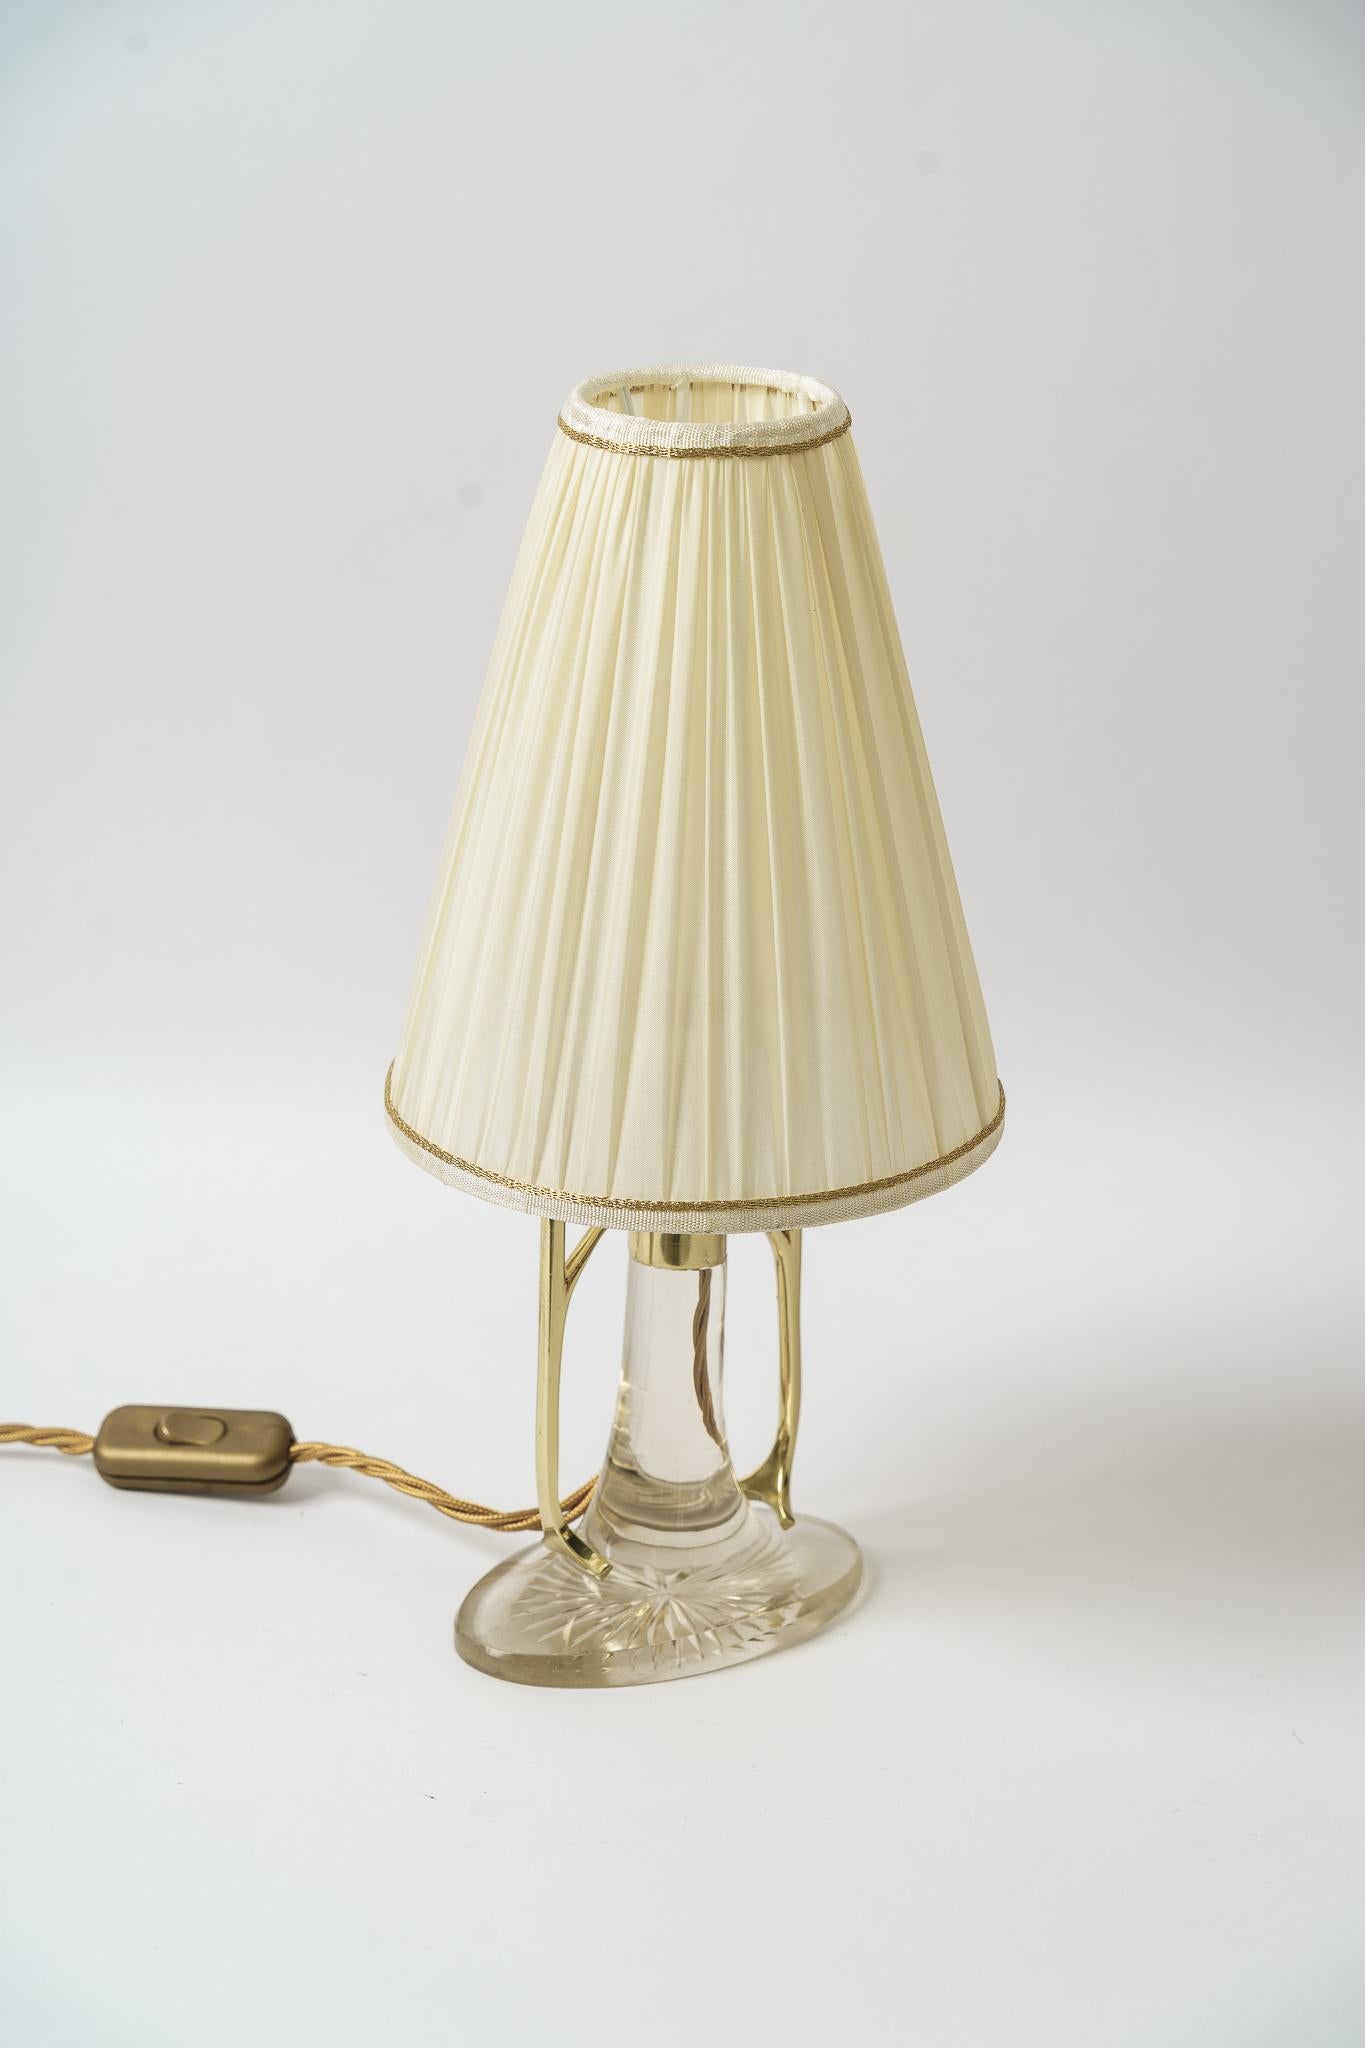 Rare art deco glass table lamp with fabric shade vienna around 1920s
Brass polished and stove enameled
The fabric shade is replaced.